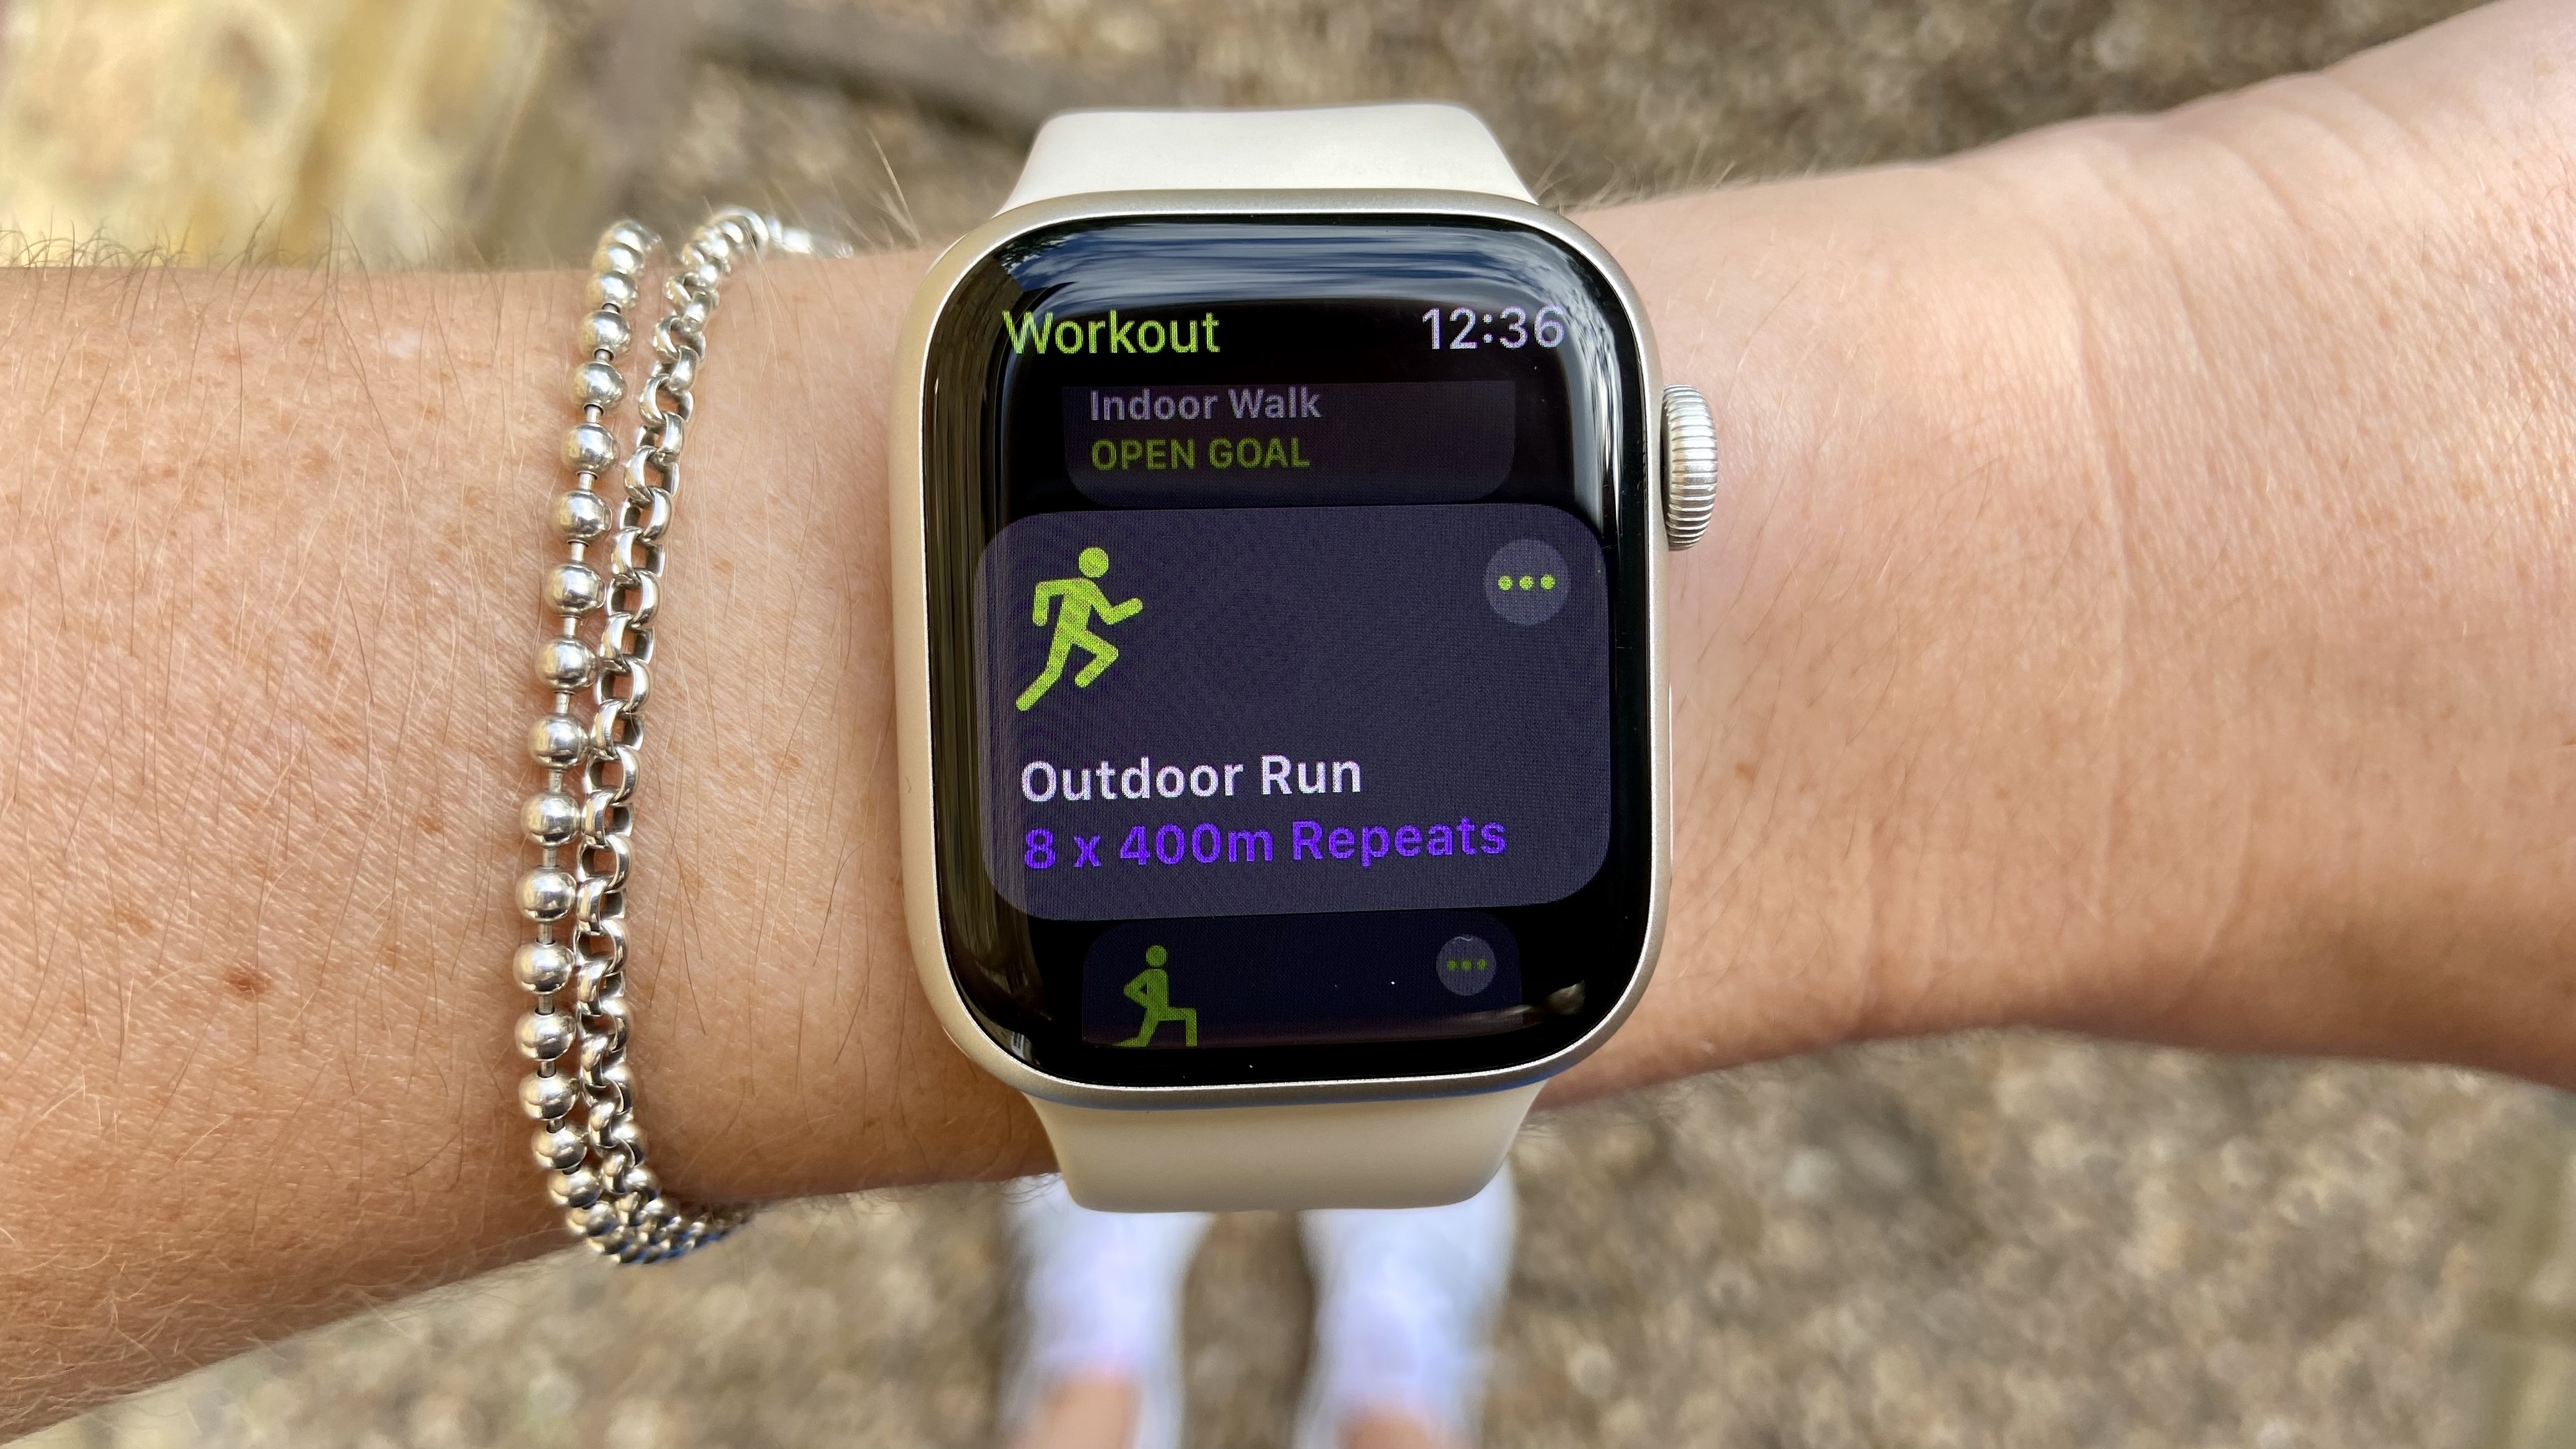 How to See Your Target Heart Rate Zones for Apple Watch on iPhone